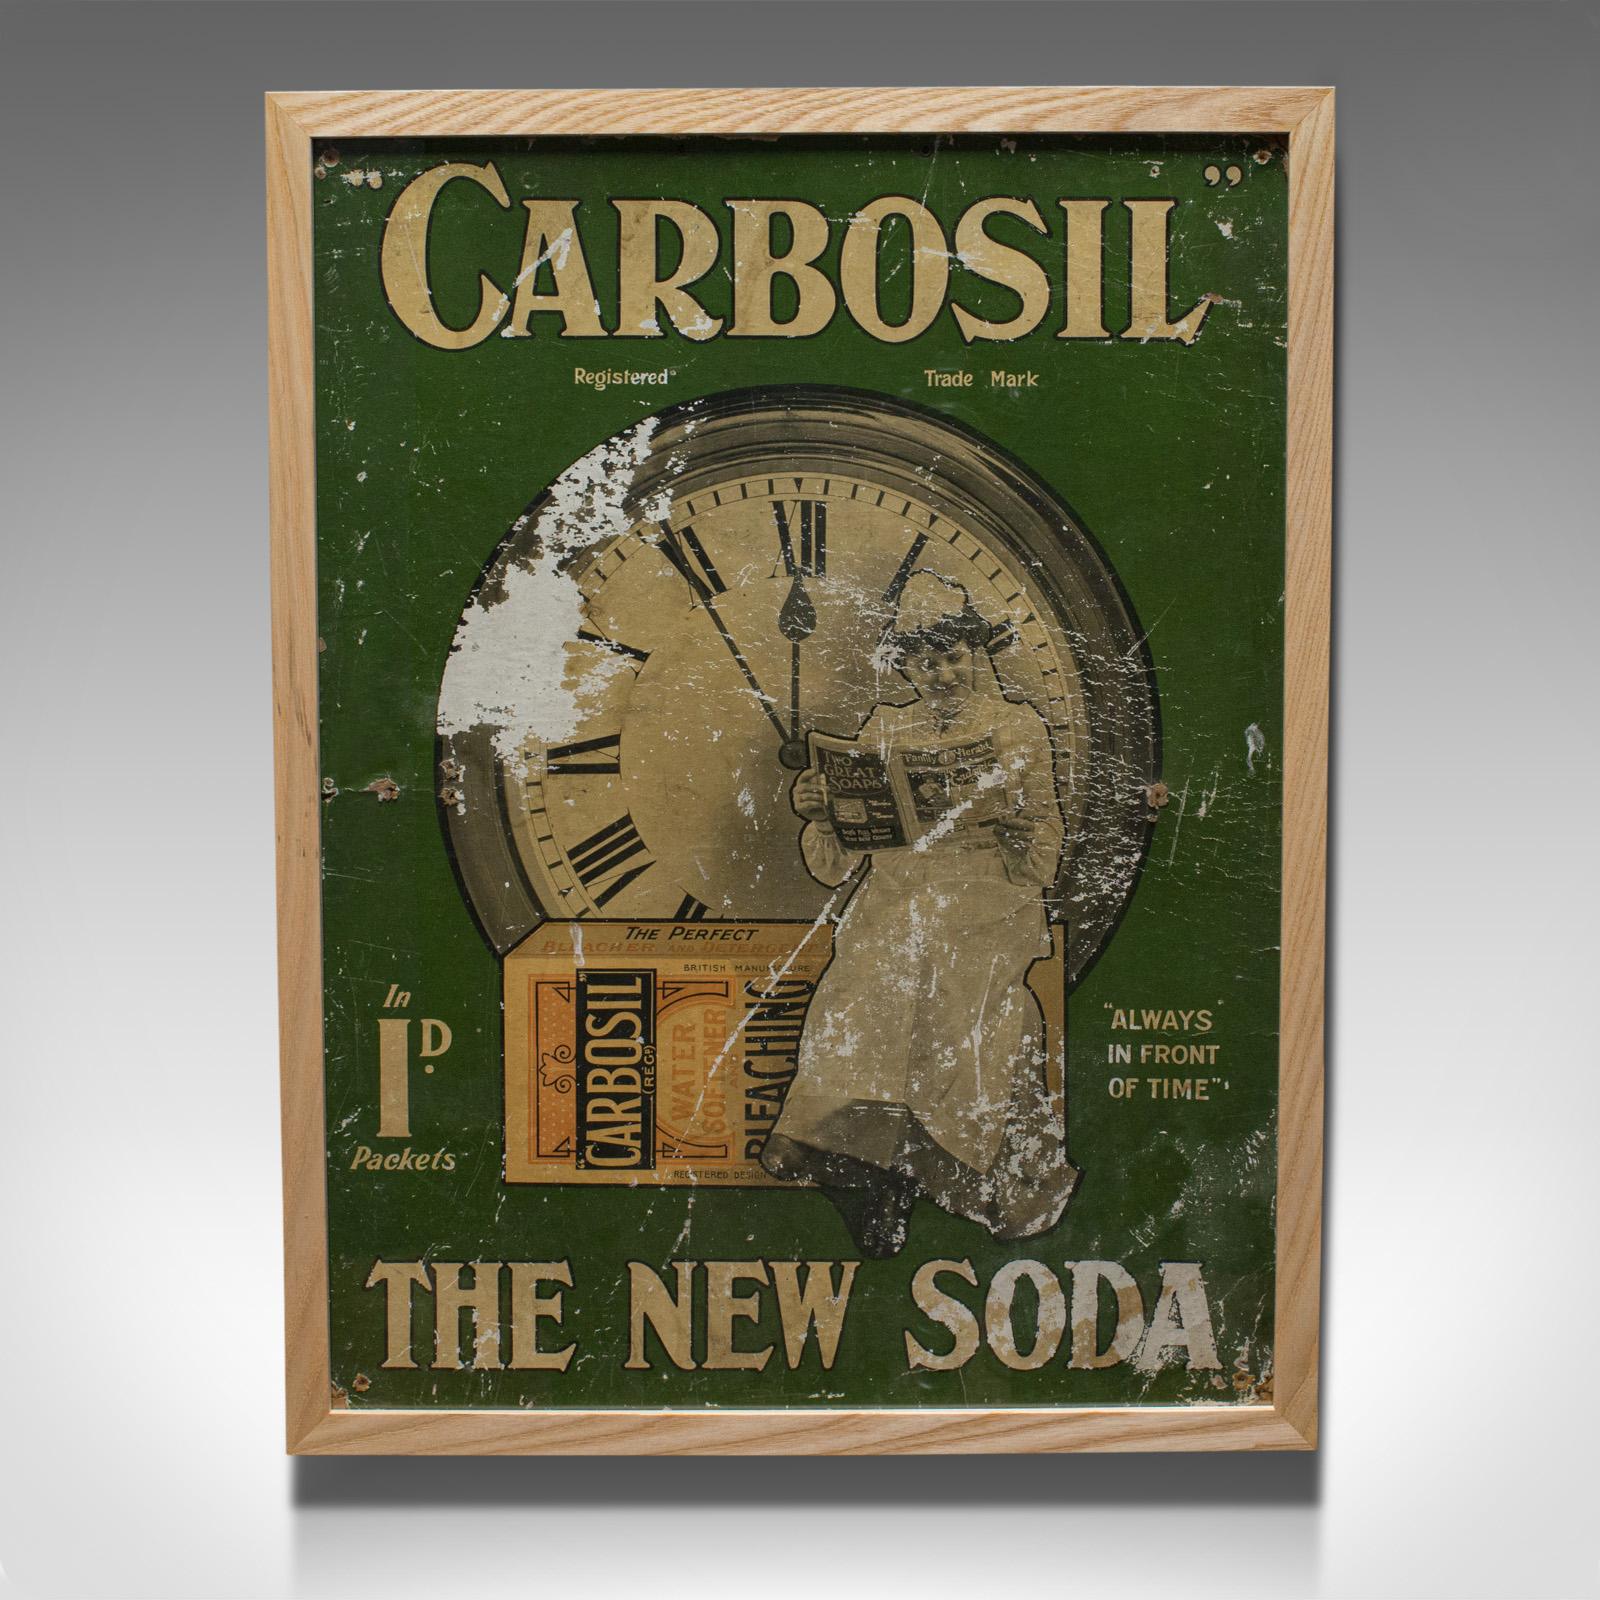 This is a framed antique advertisement. An English, advertising poster for Carbosil soap, dating to the Victorian period, circa 1900.

Appealing period retail advertising
Displays a desirable aged patina
Professionally framed behind glass and